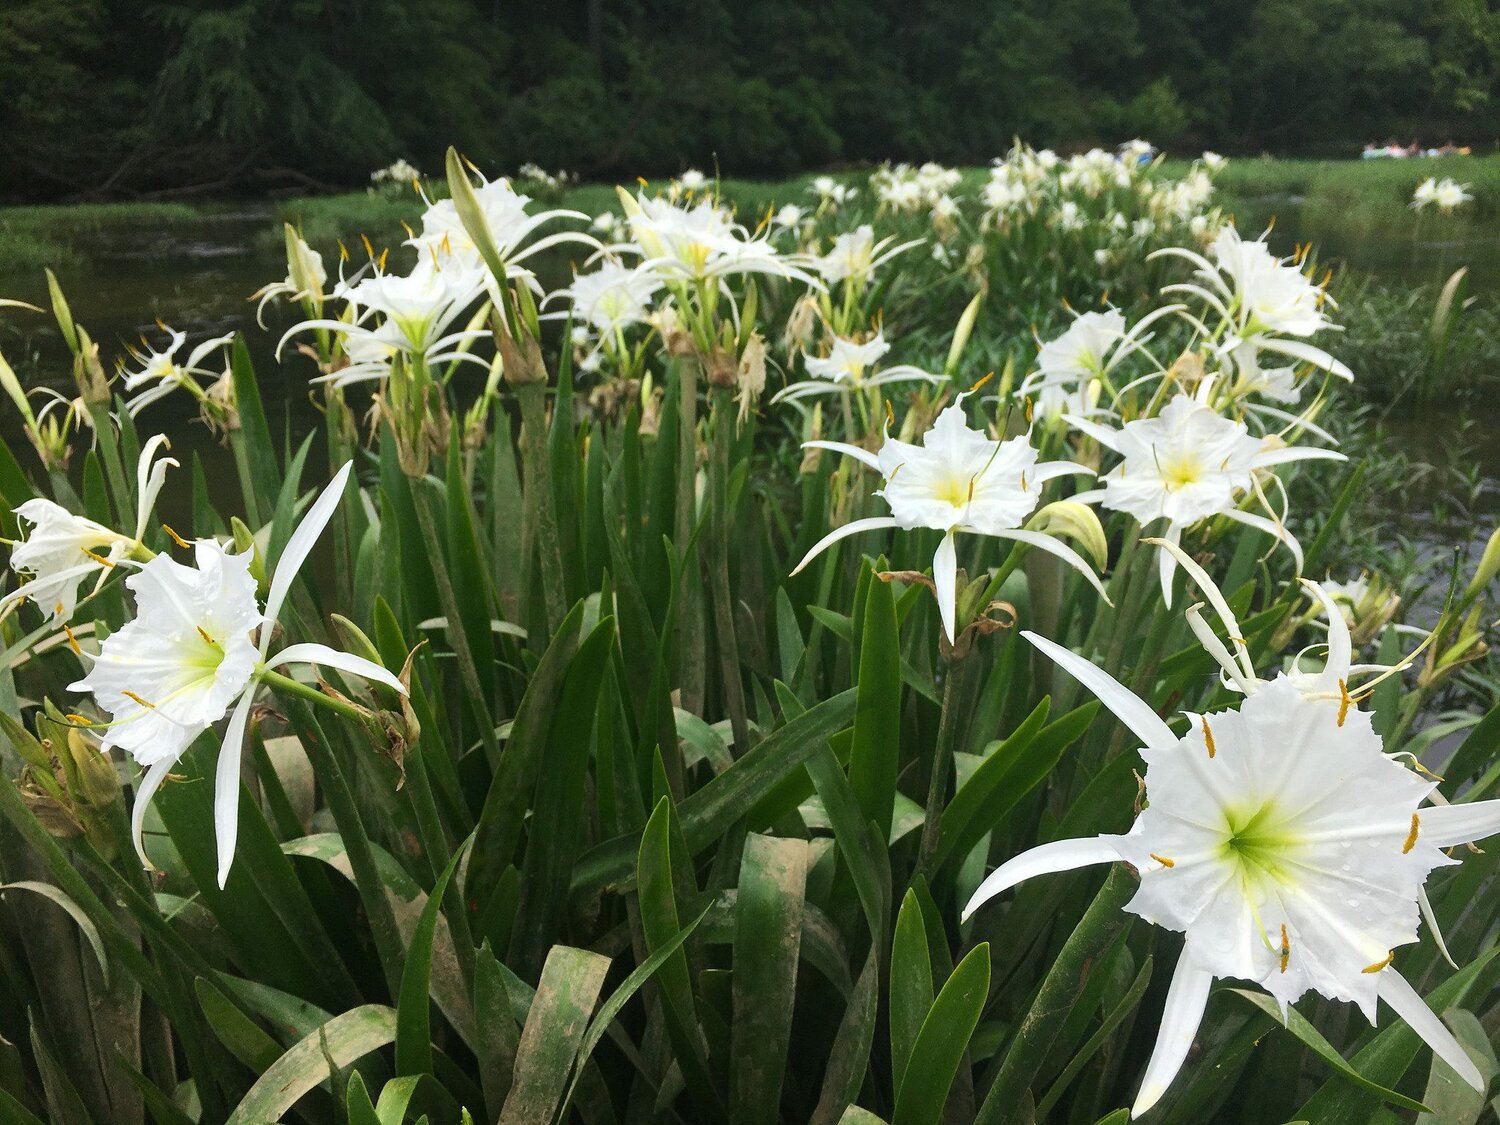 Cahaba lillies, known scientifically as Hymenocallis coronaria, are aquatic perennial plants found in sunny, riverine habitats. The species was first described by American botanist William Bartram in 1773.